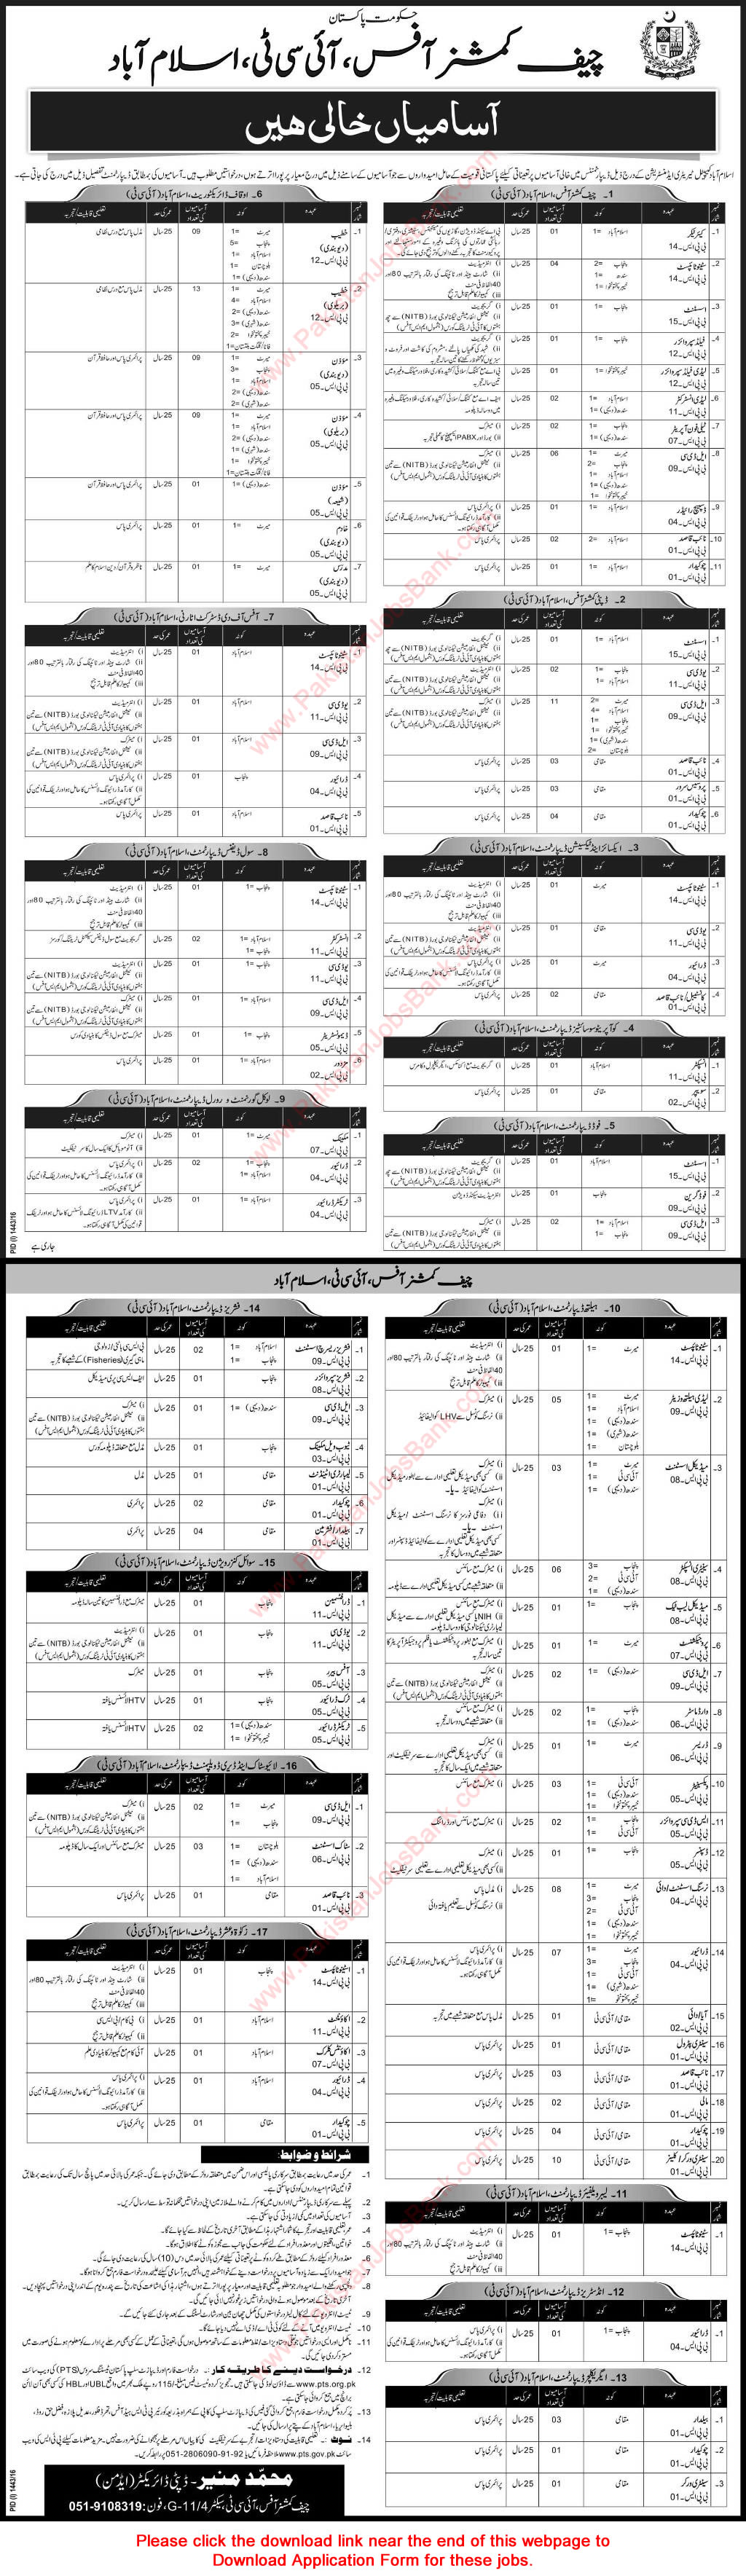 Islamabad Capital Territory Jobs 2016 September in Government Departments PTS Application Form Latest